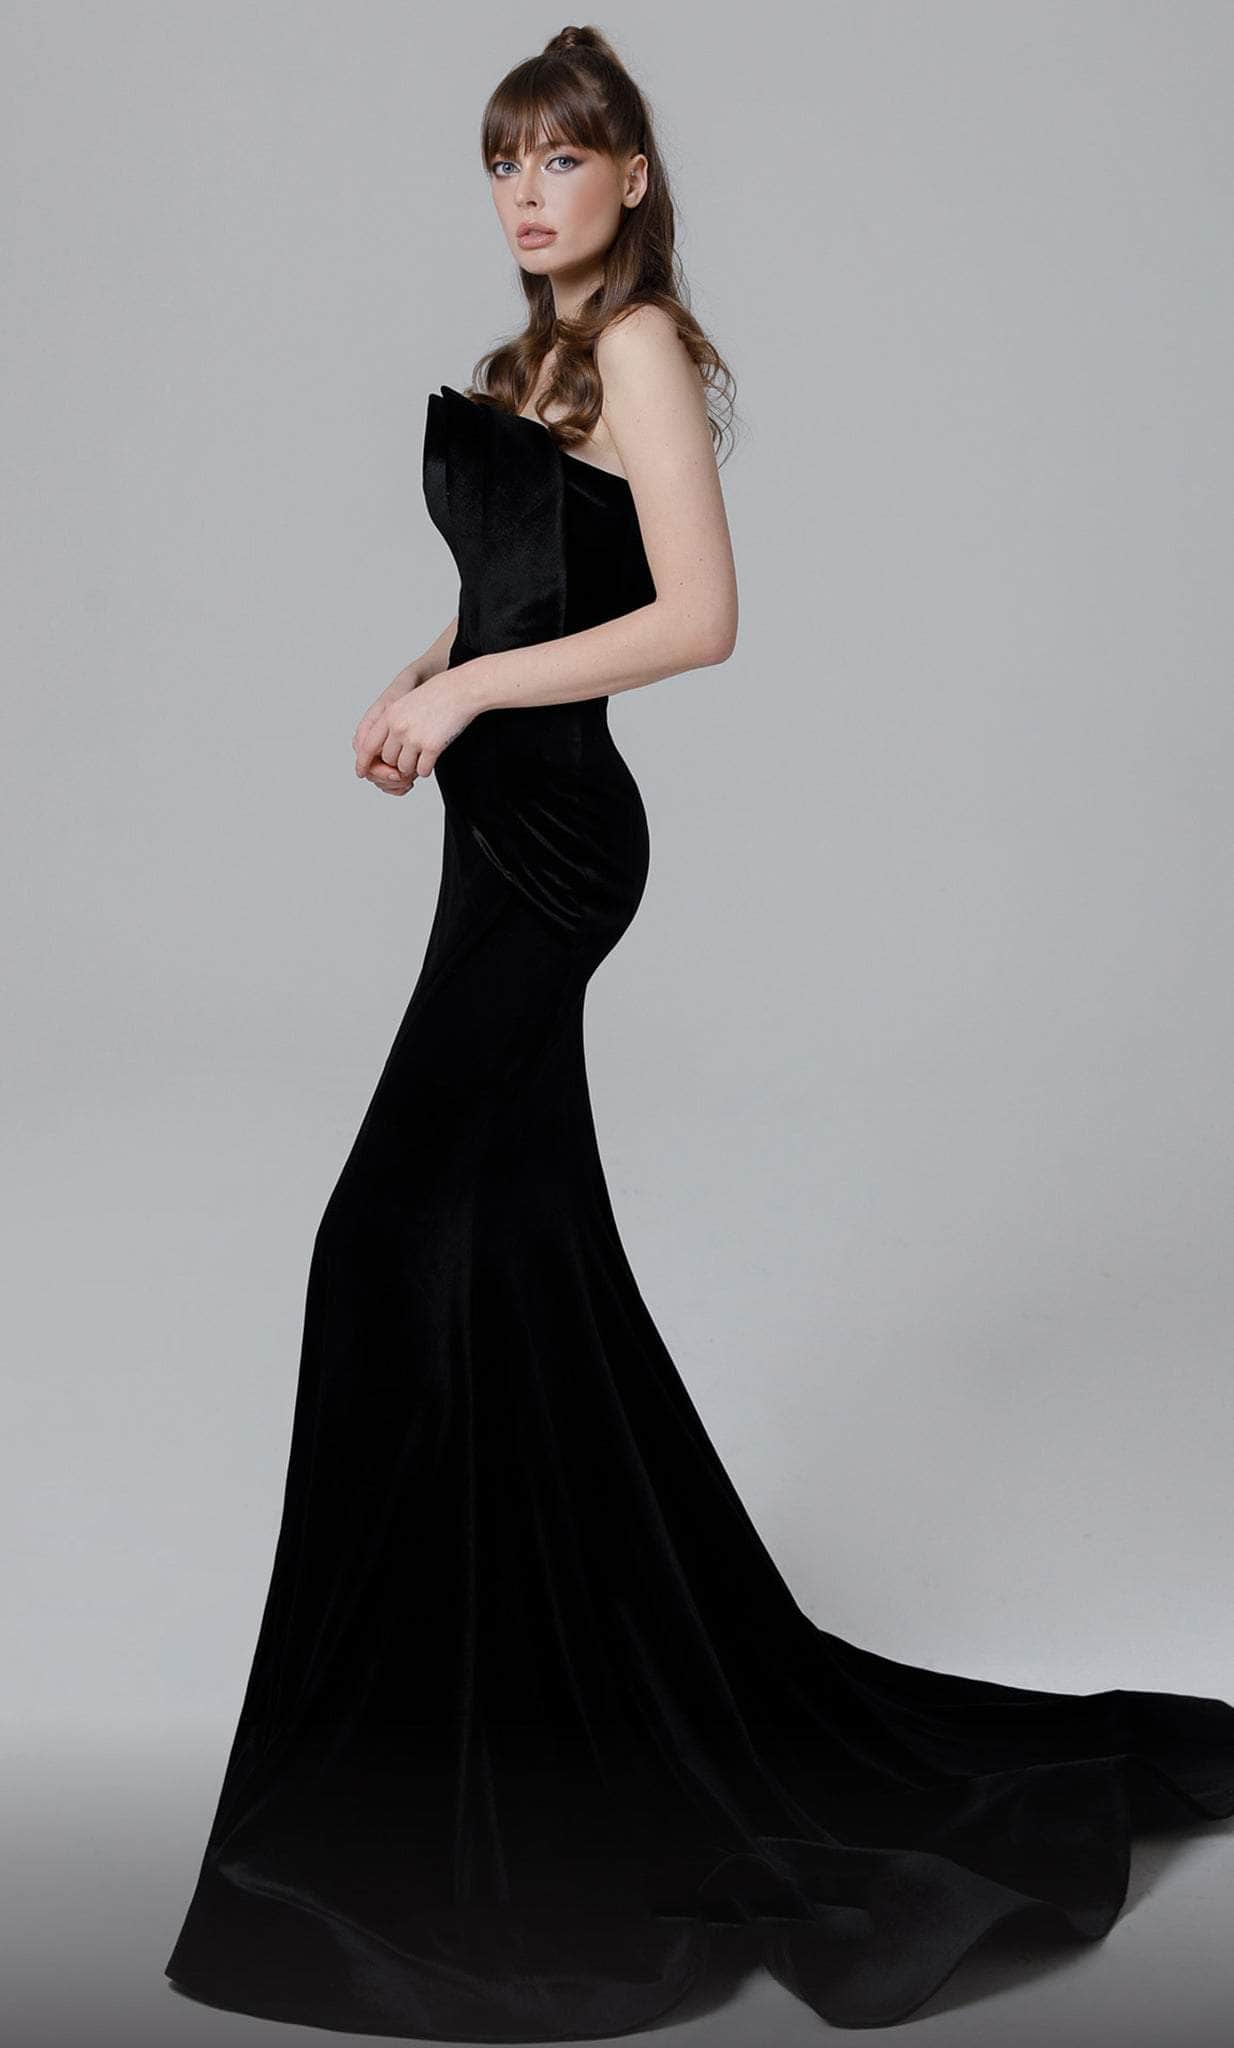 Black Velvet Mermaid Black Velvet Evening Gown With Sparkling Crystals And  Illusion Long Sleeves Perfect For Special Occasions, Proms, And Formal  Parties Dubai Aso Ebi CL2891 From Allloves, $105.51 | DHgate.Com